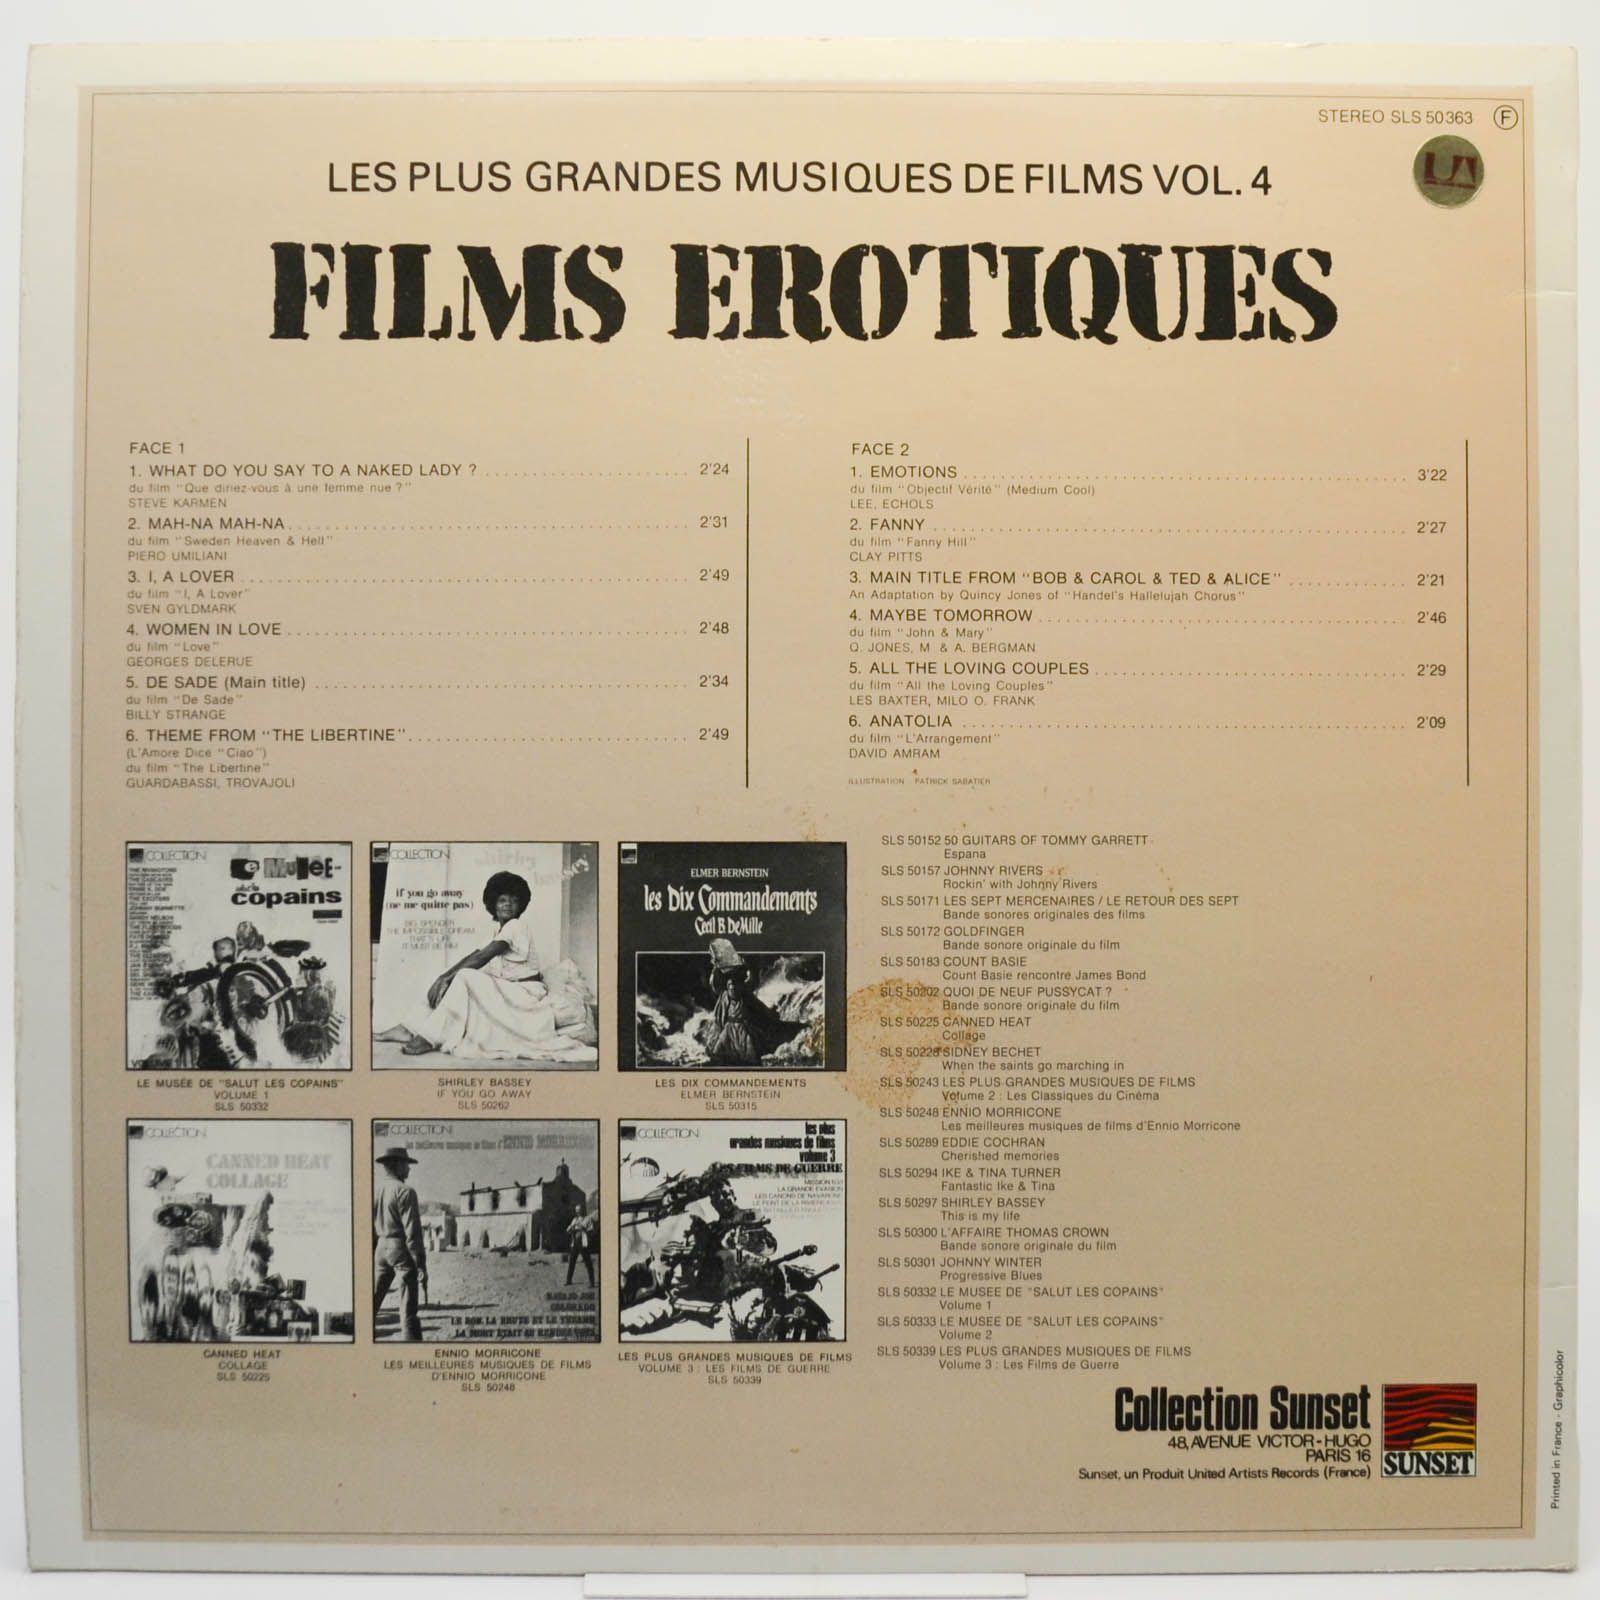 LeRoy Holmes Orchestra — Films Erotiques, 1974